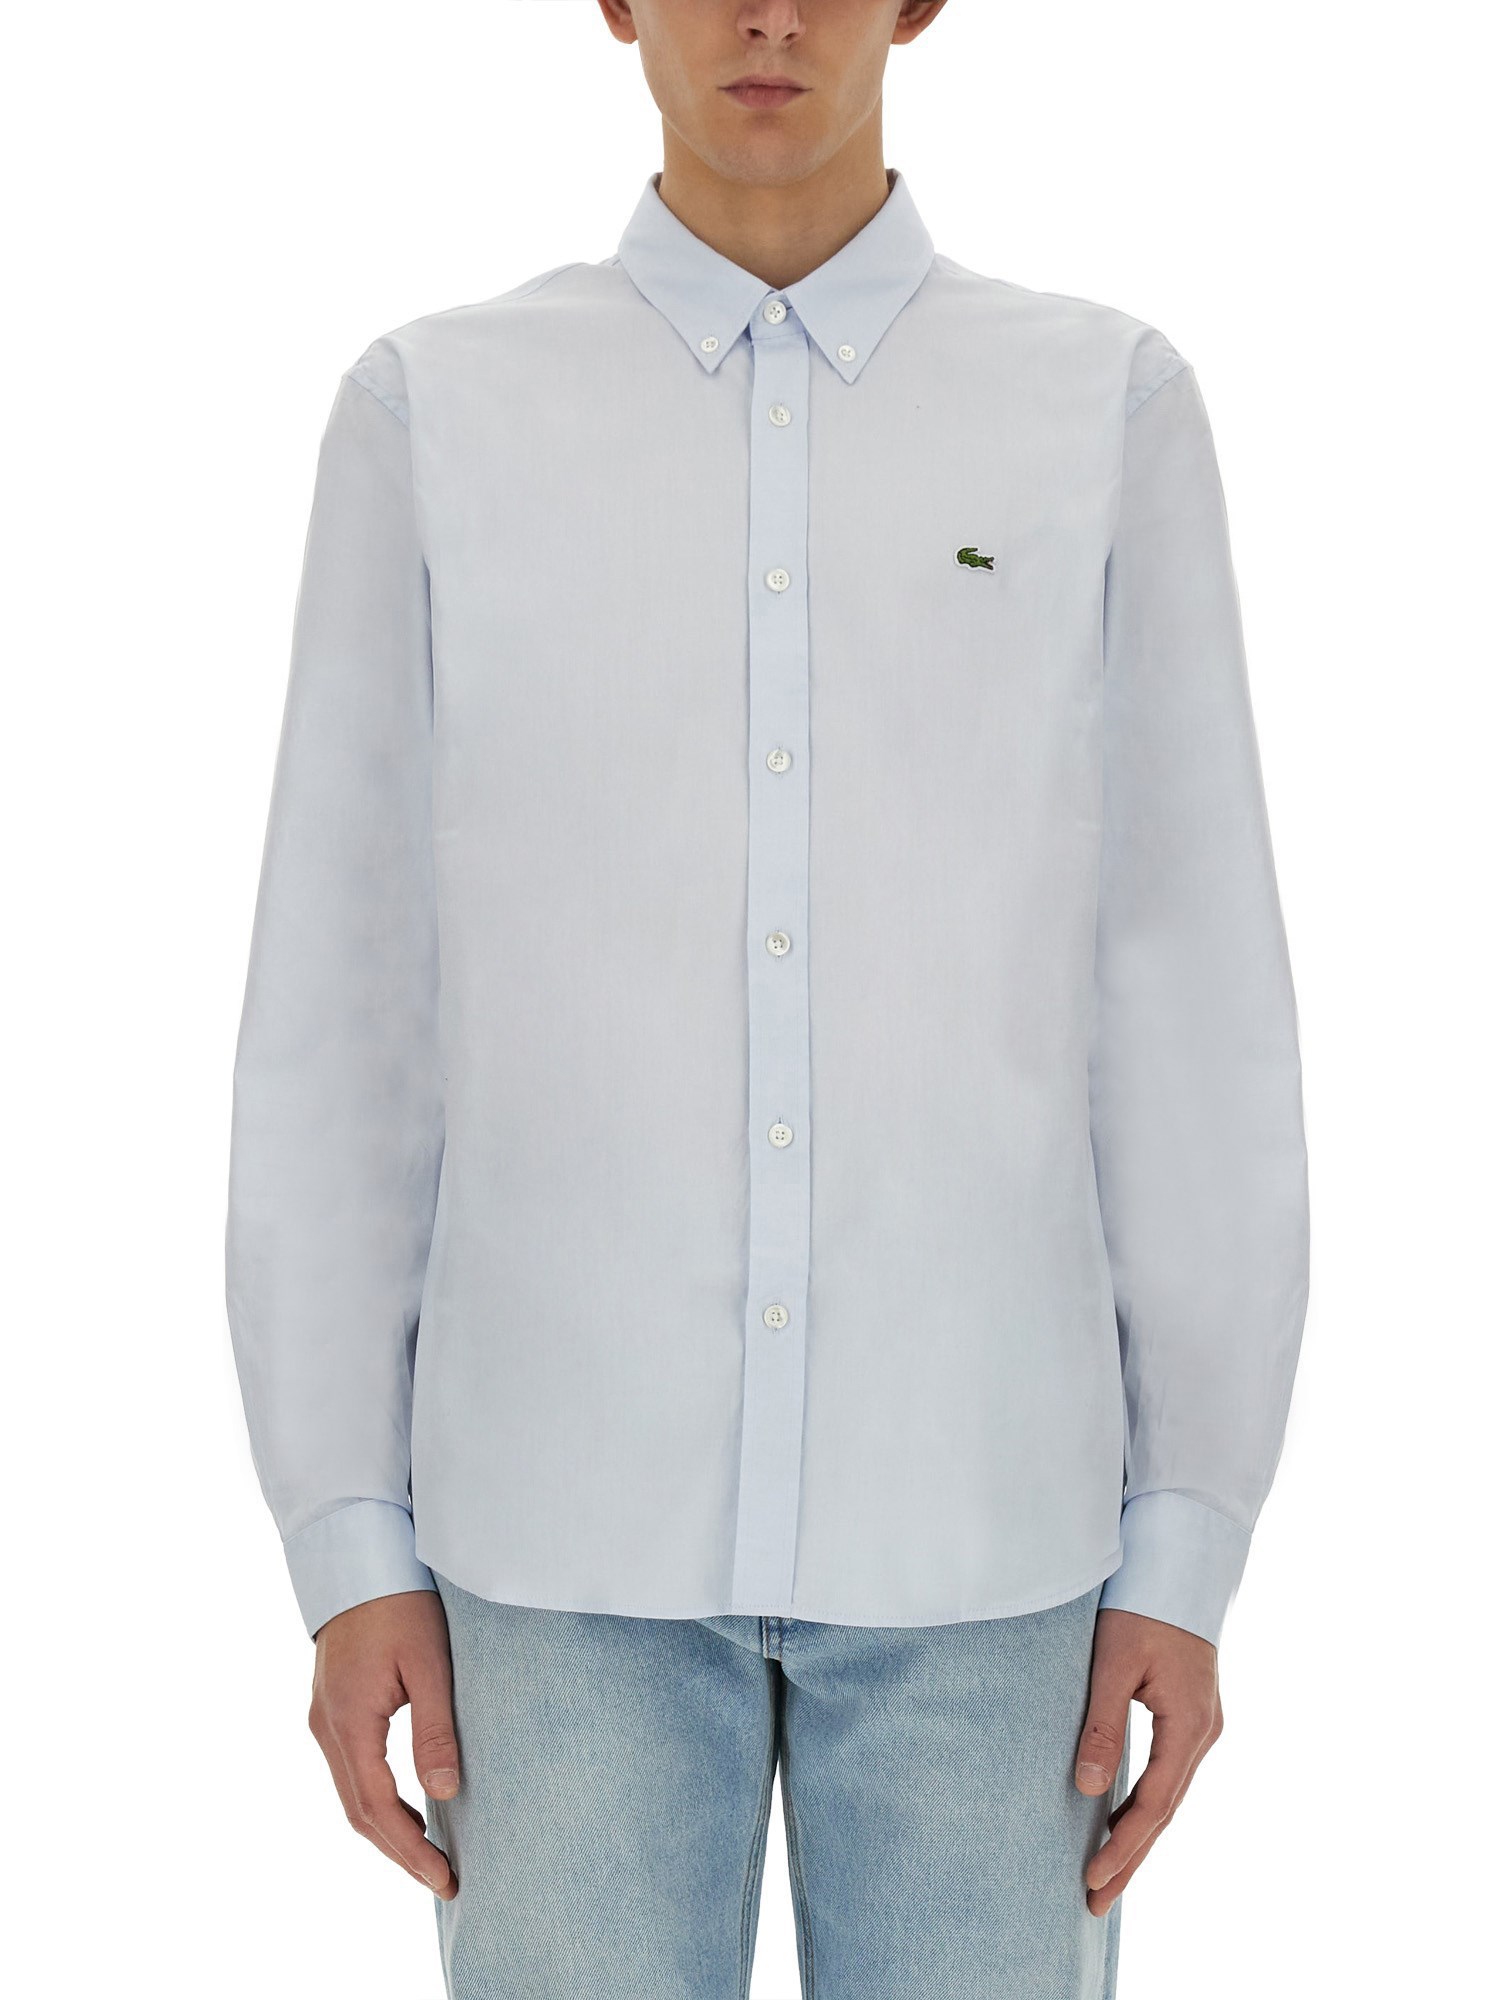 lacoste shirt with logo